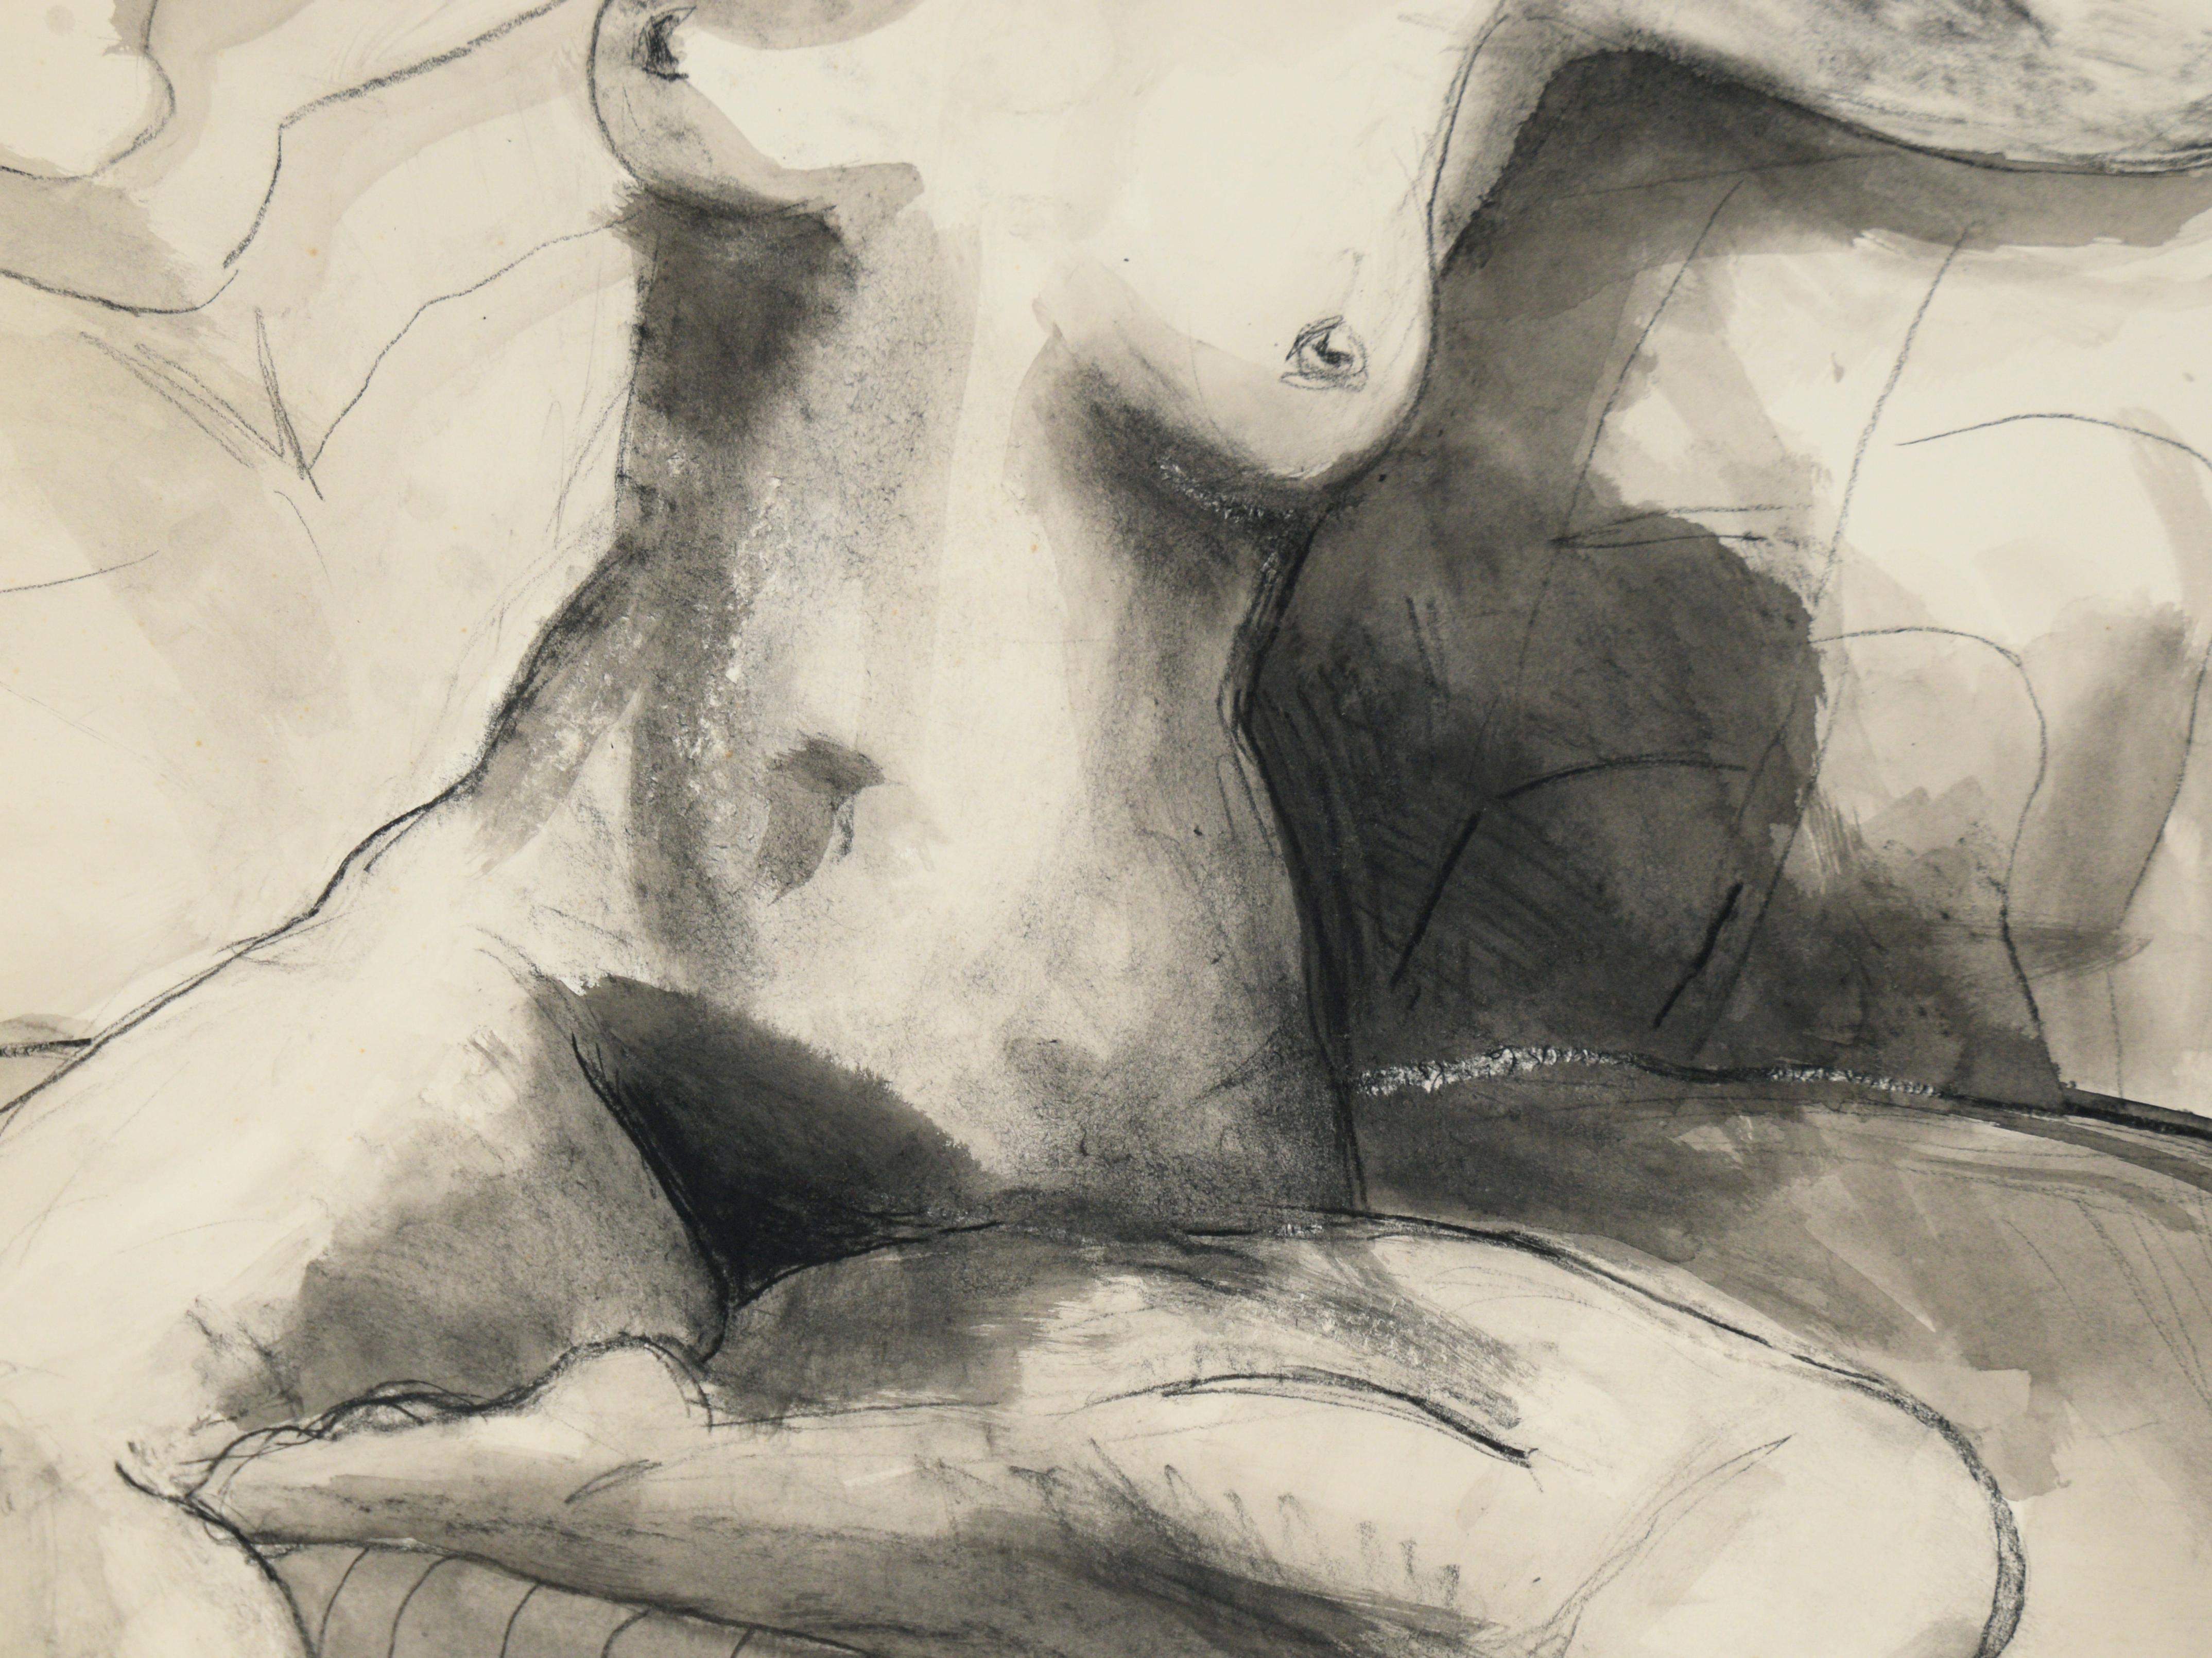 Figurative Nude Study - Watercolor and Charcoal on Paper

Watercolor and charcoal painting of a nude reclining woman by acclaimed bluegrass musician and San Francisco artist Katherine 